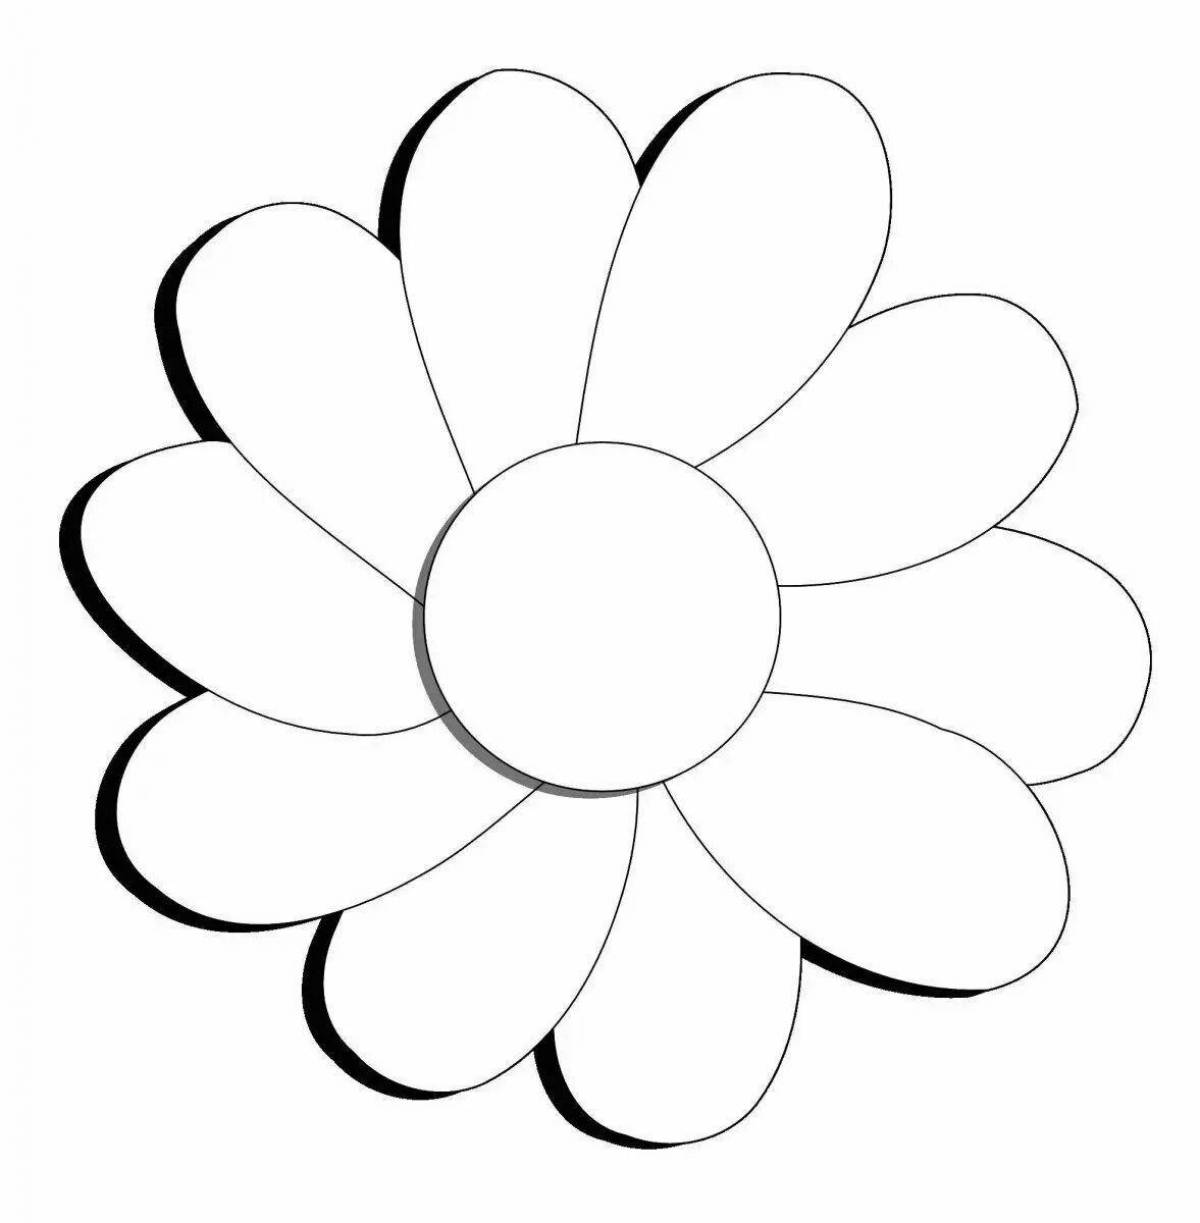 Radiant coloring page flowers pattern